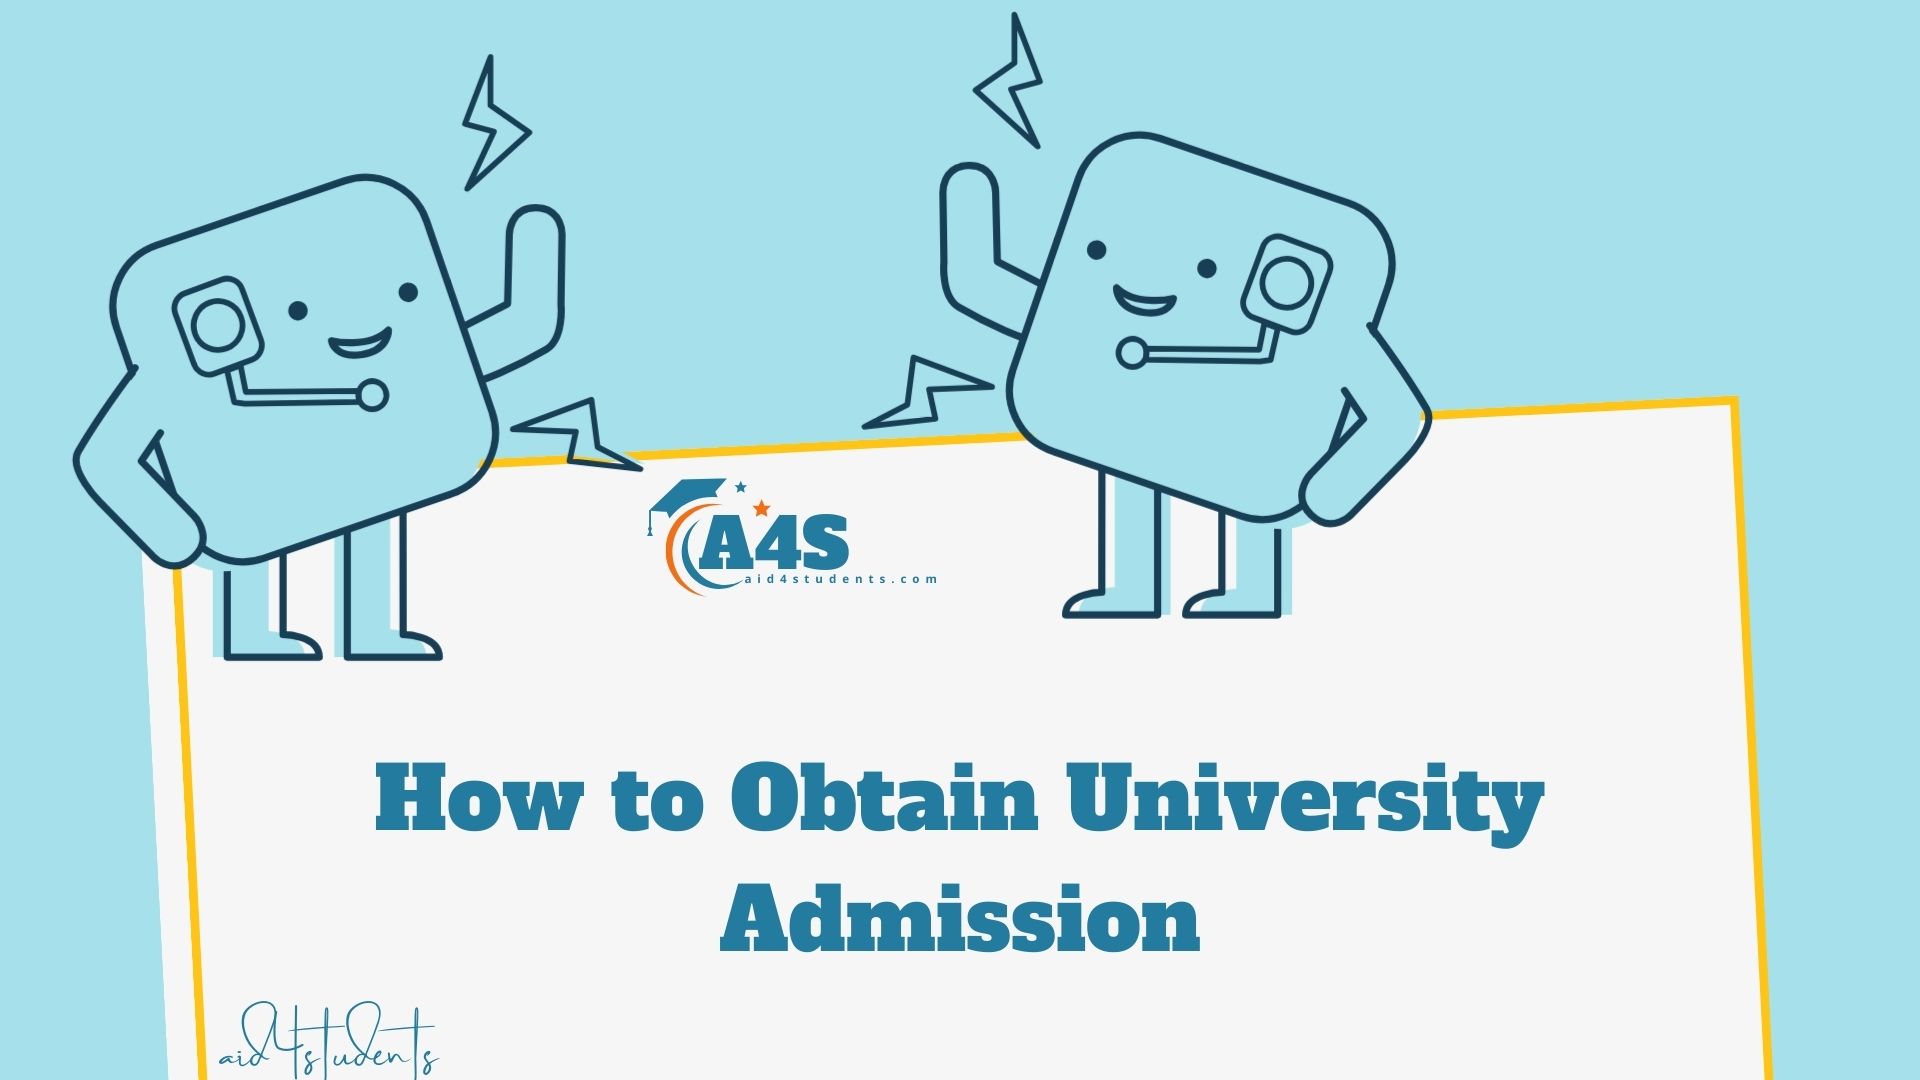 How to Obtain University Admission